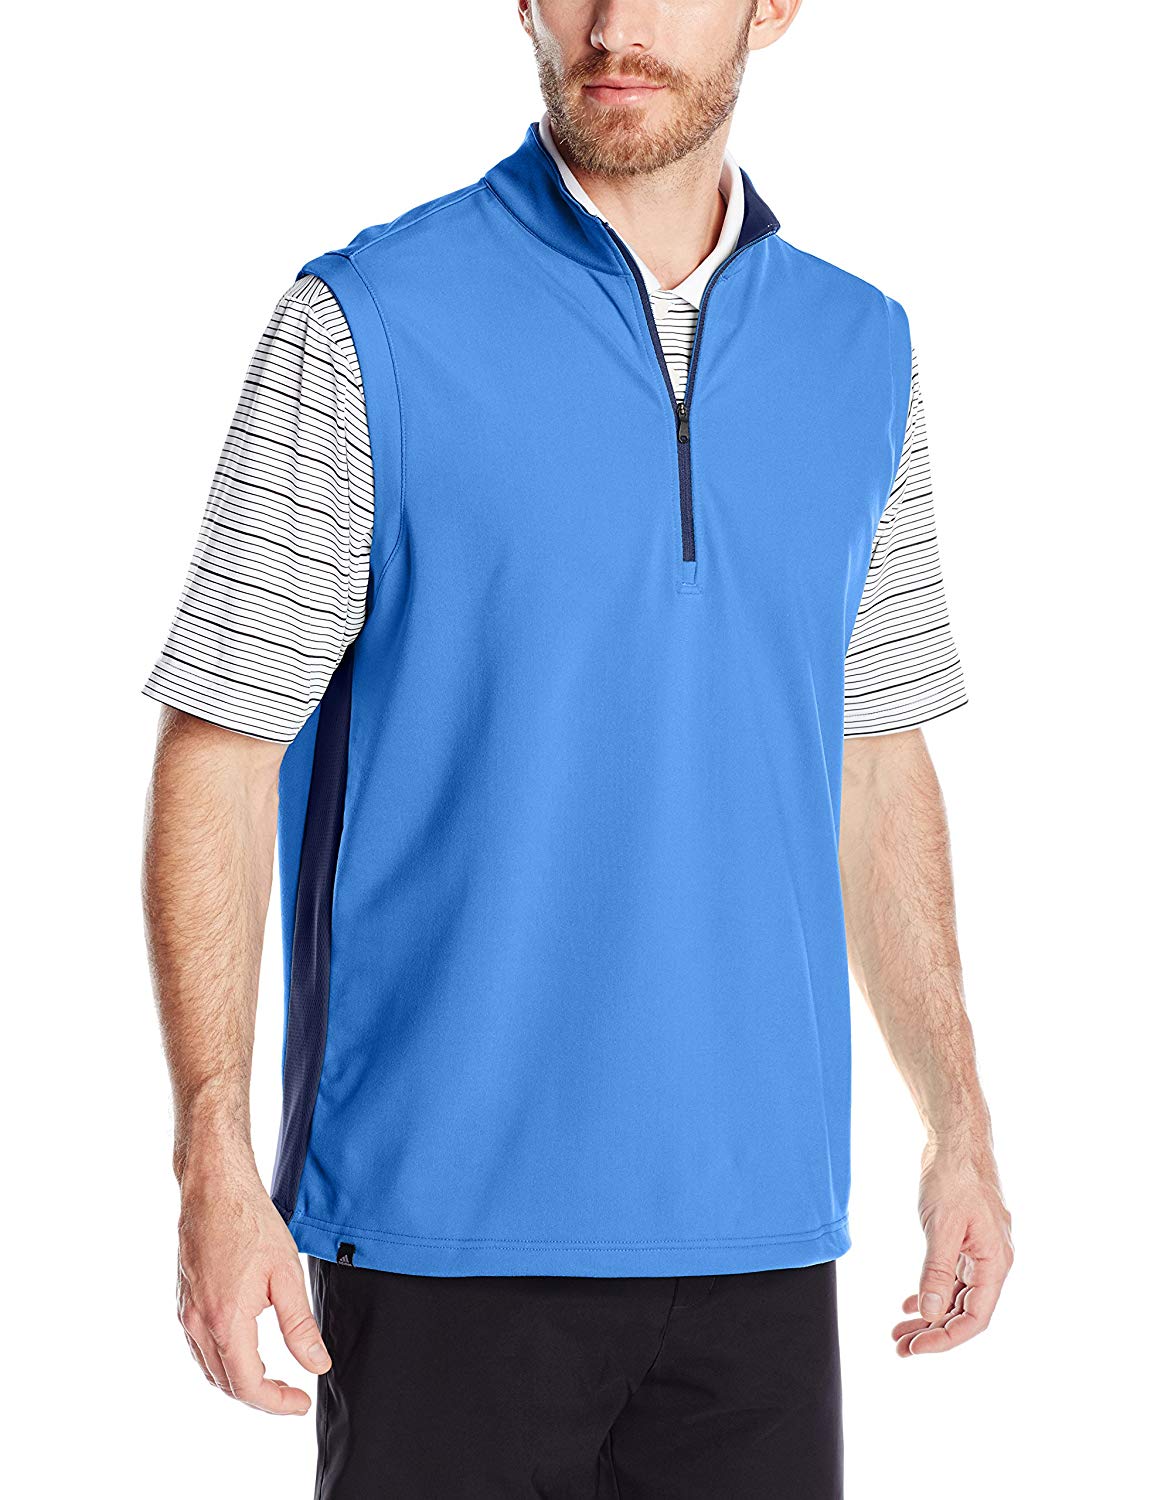 Adidas Mens Climacool Competition Golf Vests